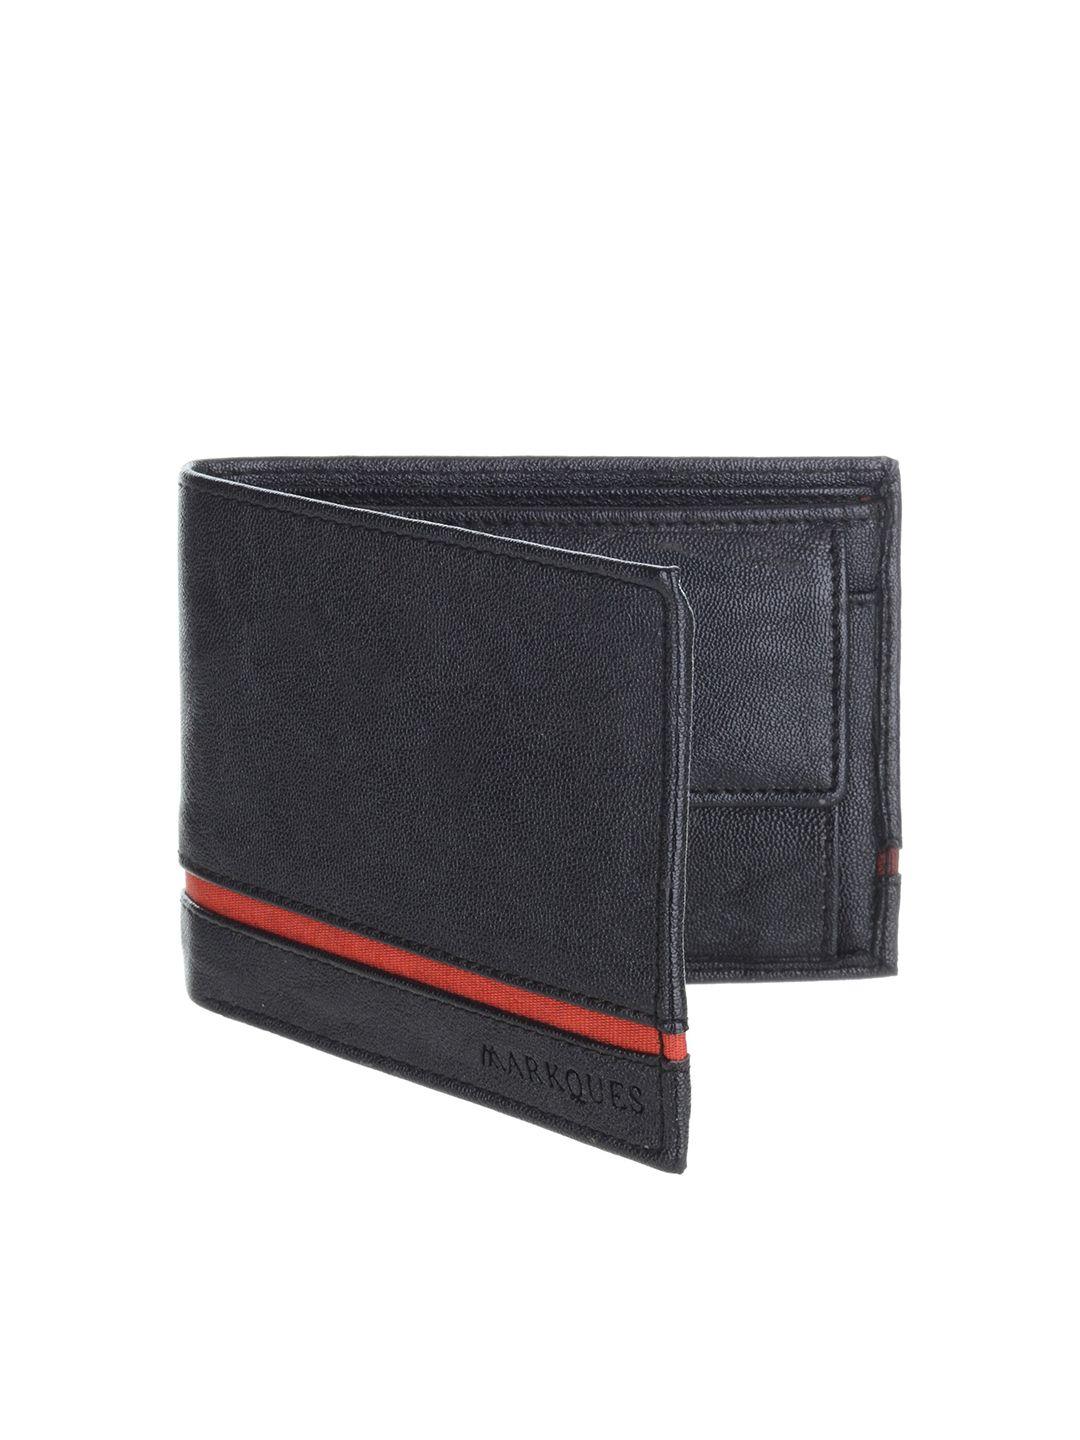 markques men two fold wallet with sim card holder